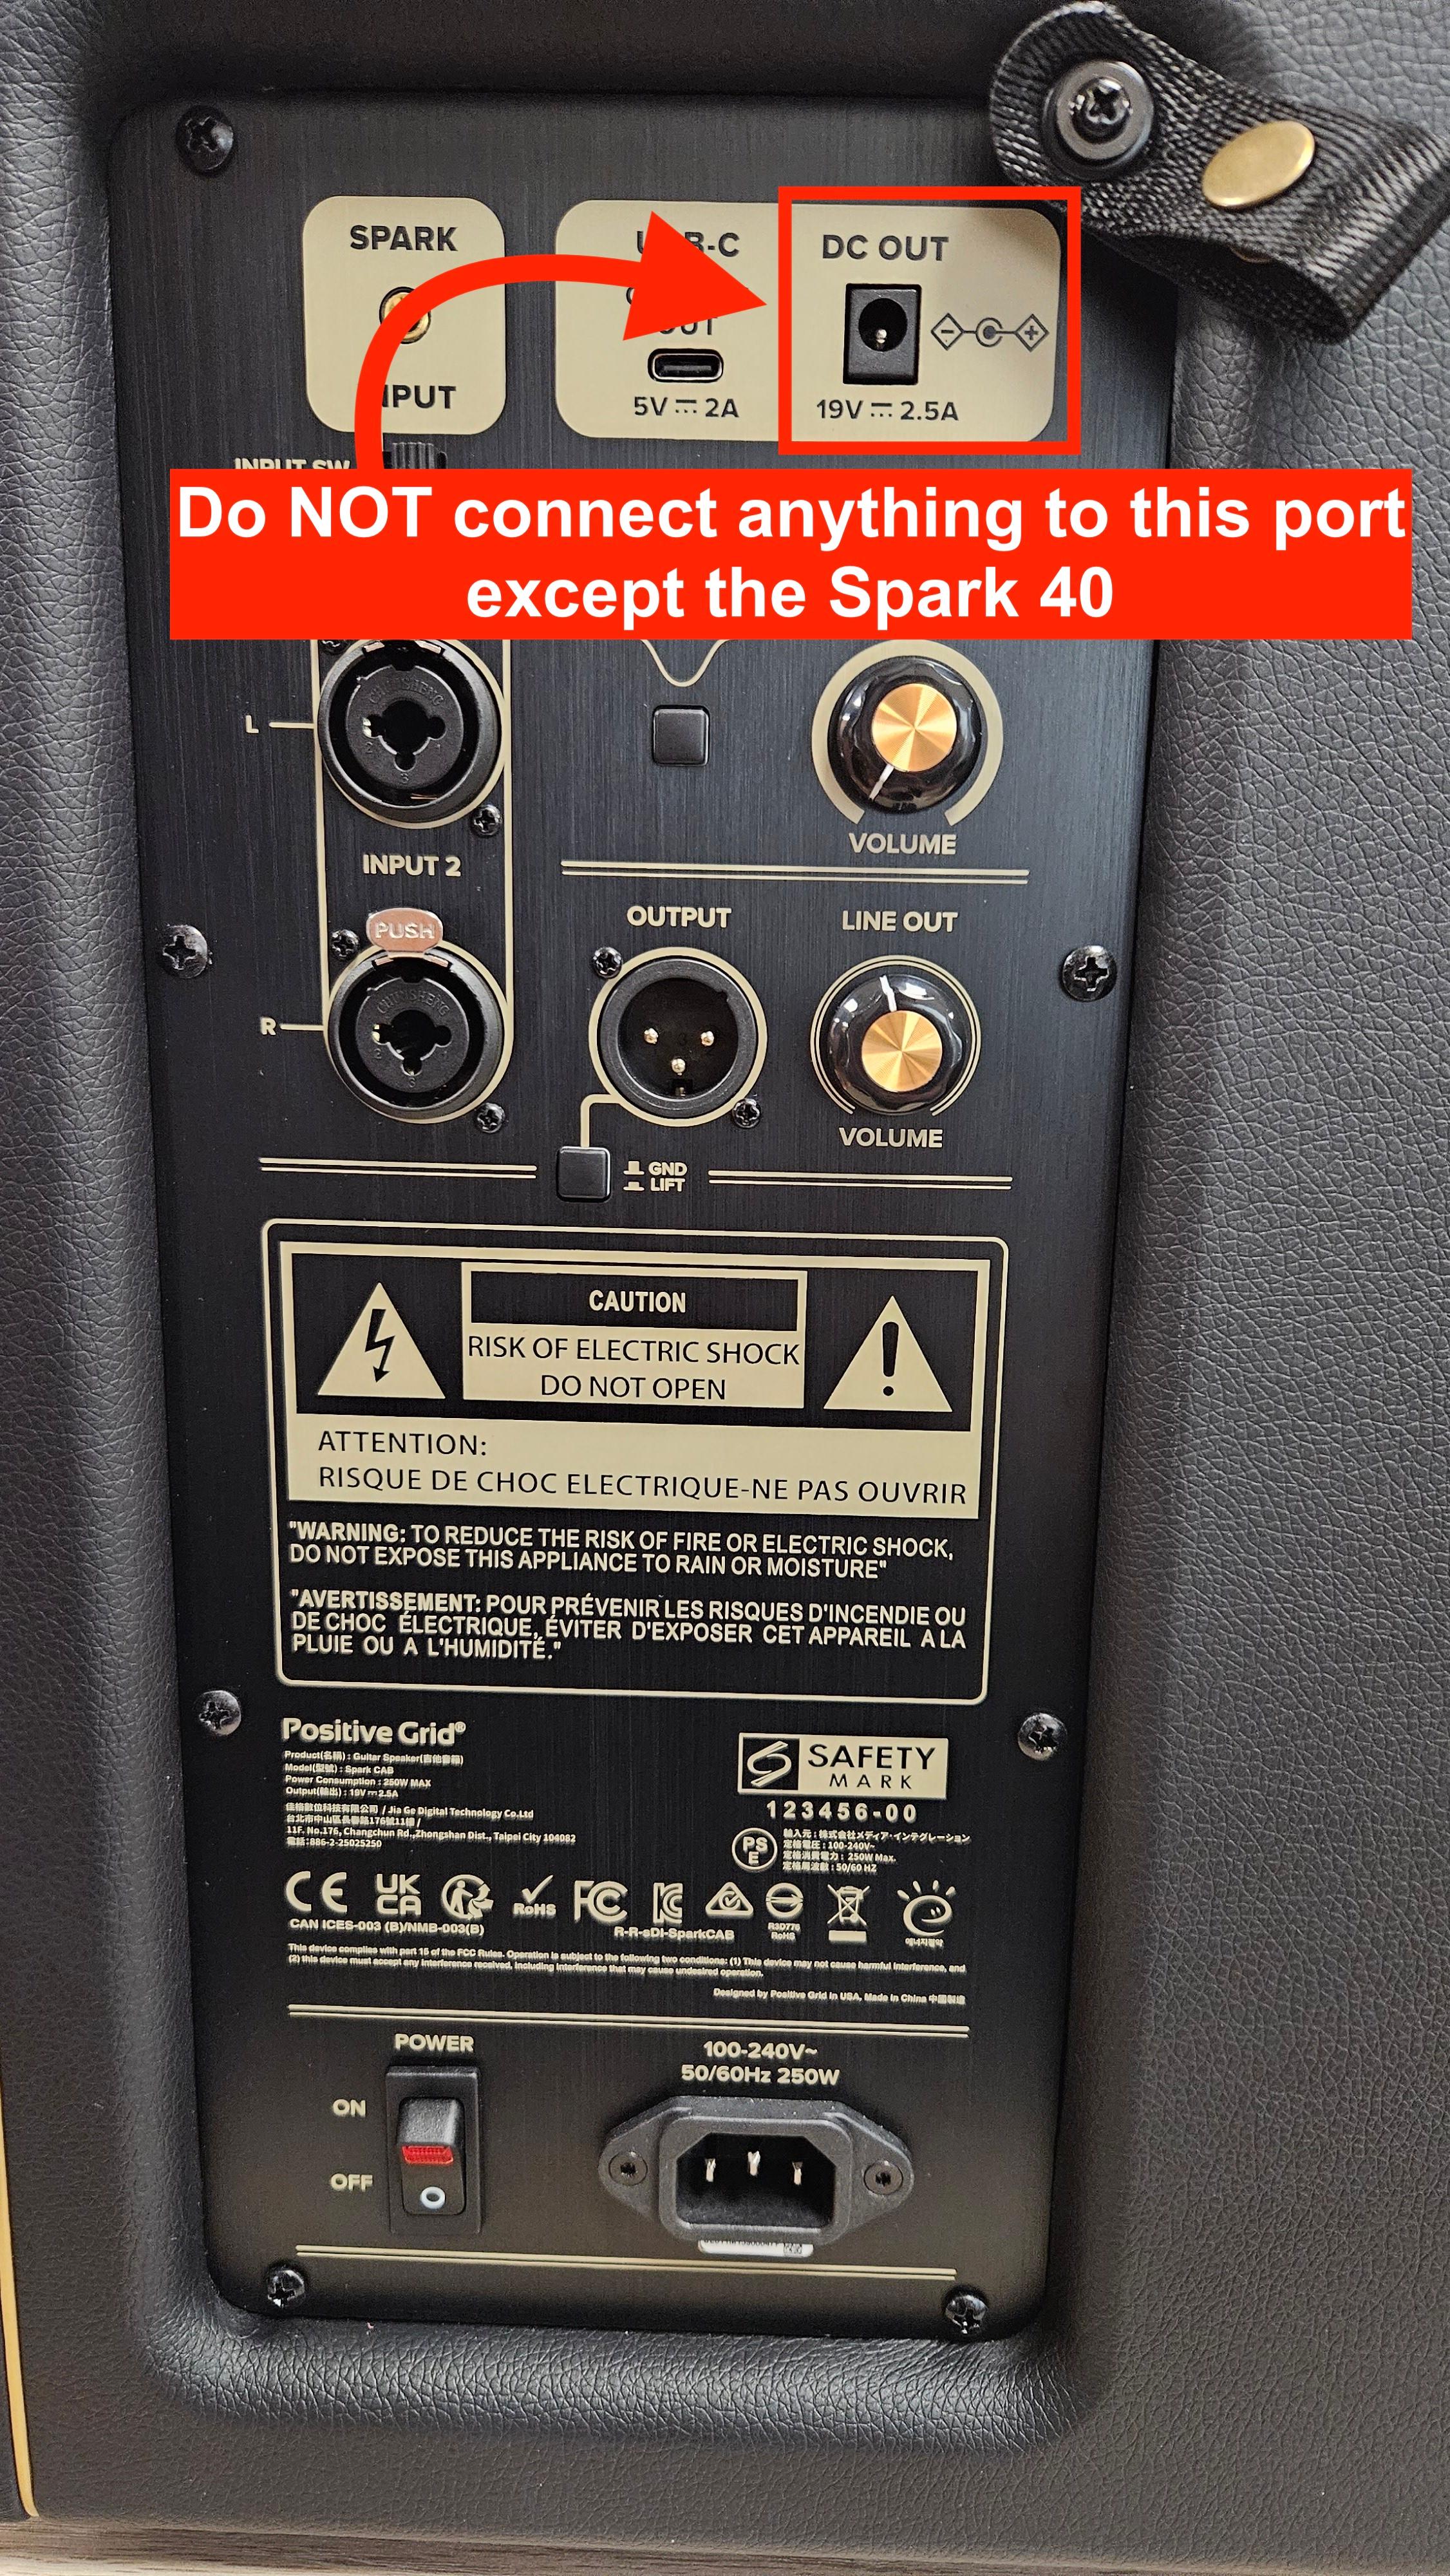 Do not use the DC output port on the Spark CAB as a power source for anything else than the Spark 40